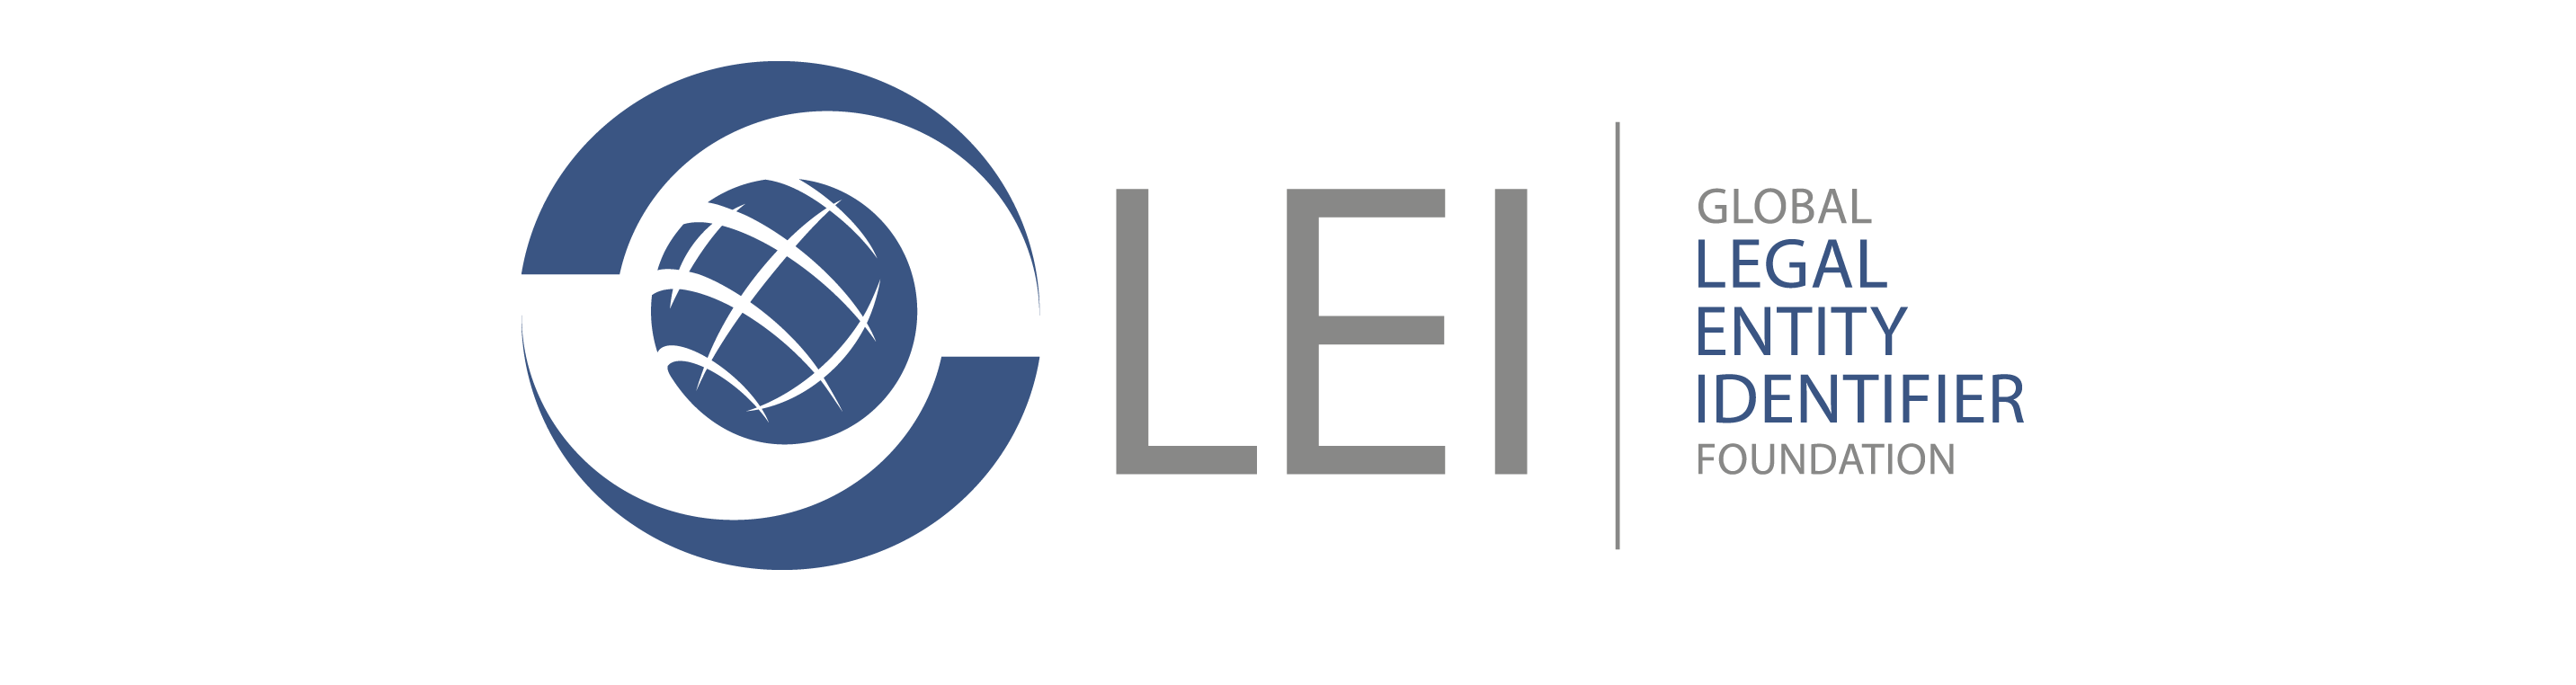 GLEIF Welcomes Pioneering Advances by China Financial Certification Authority (CFCA) Which Pave the Way for Increased LEI Usage in Mass Market Digital Identity Products